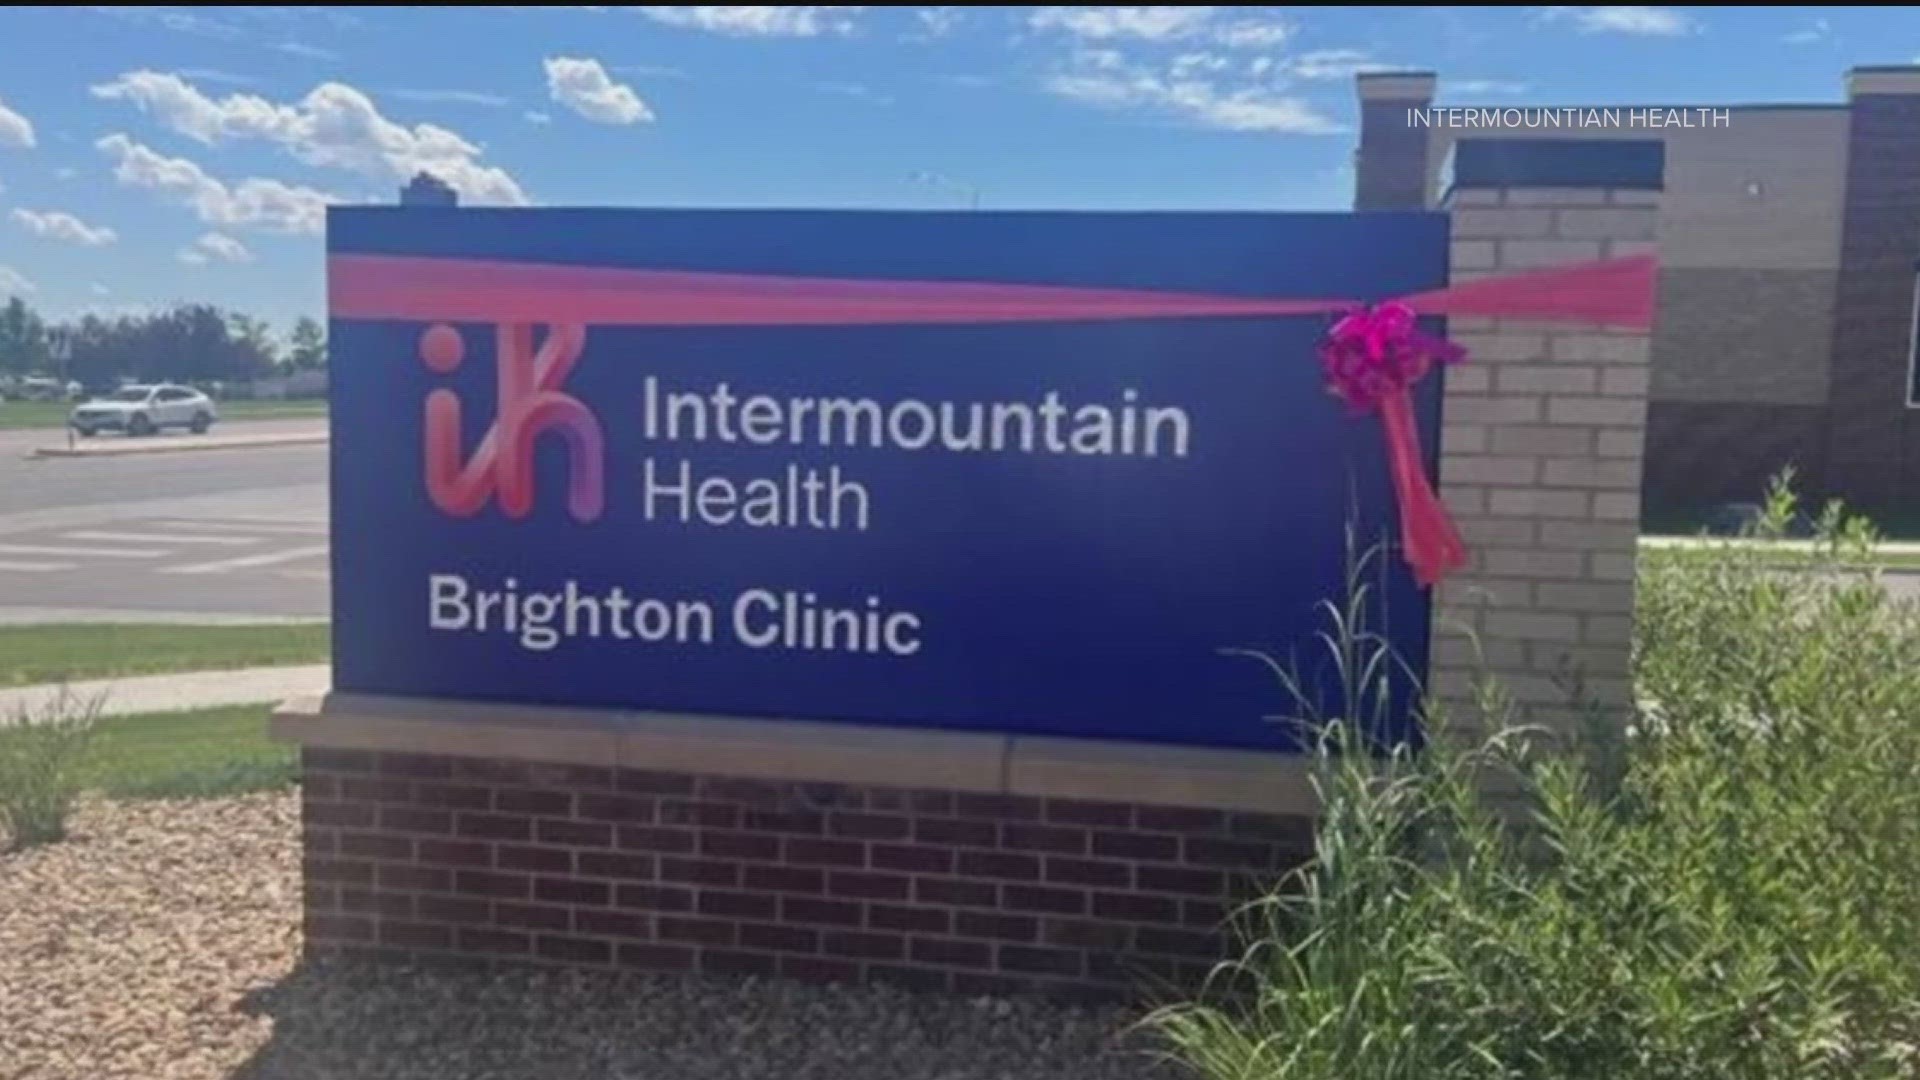 As new signage is installed at each site, four Colorado hospitals will get new names.